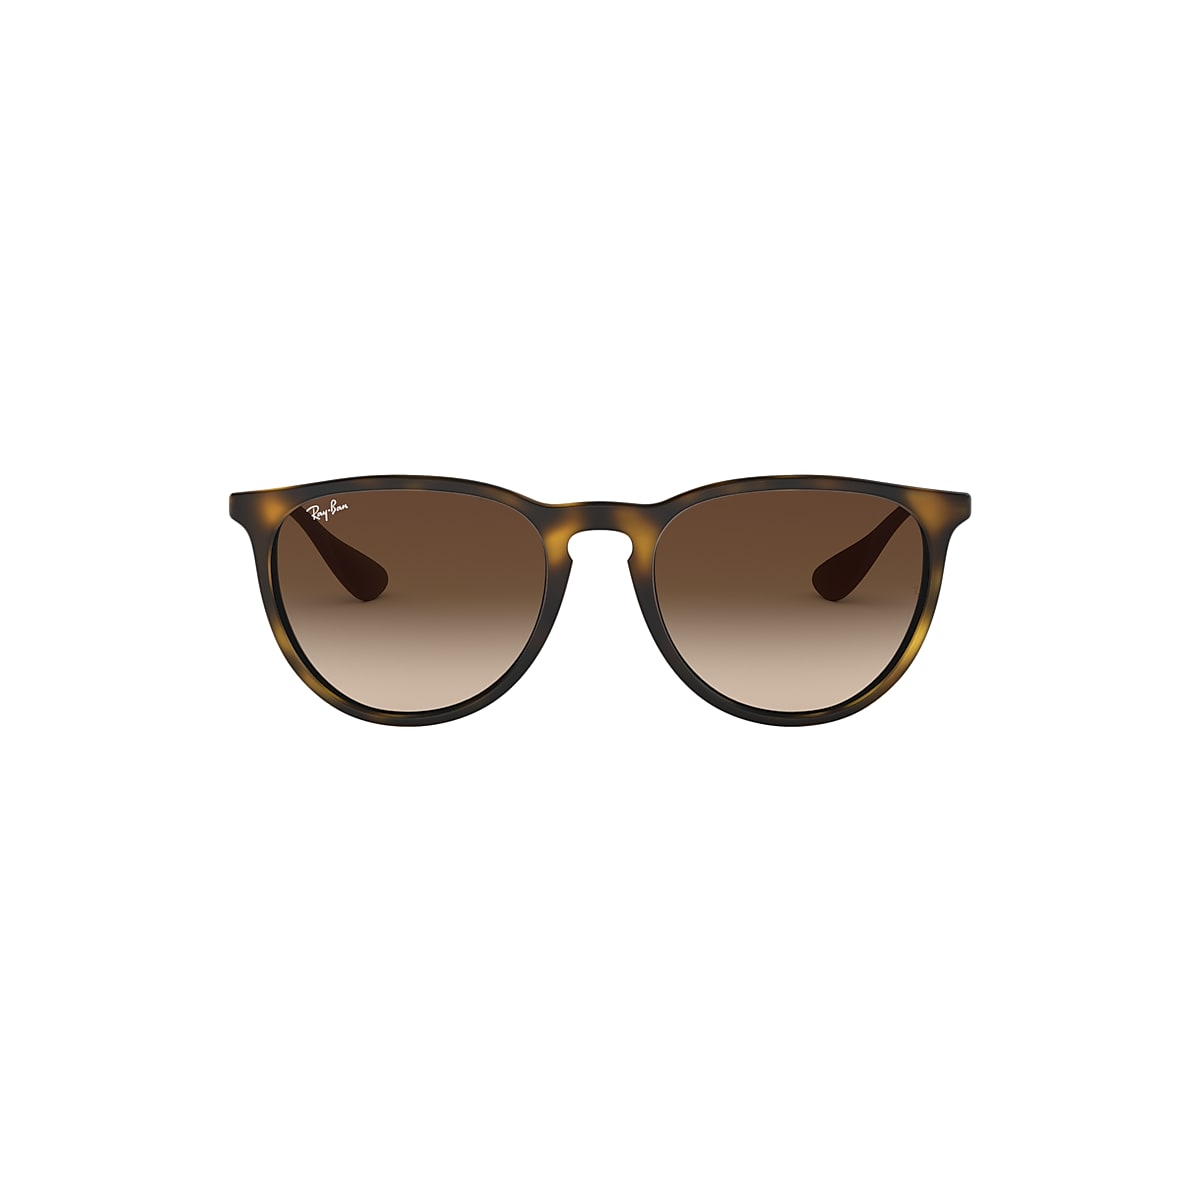 ERIKA CLASSIC Sunglasses in Havana and Brown - RB4171 | Ray-Ban®